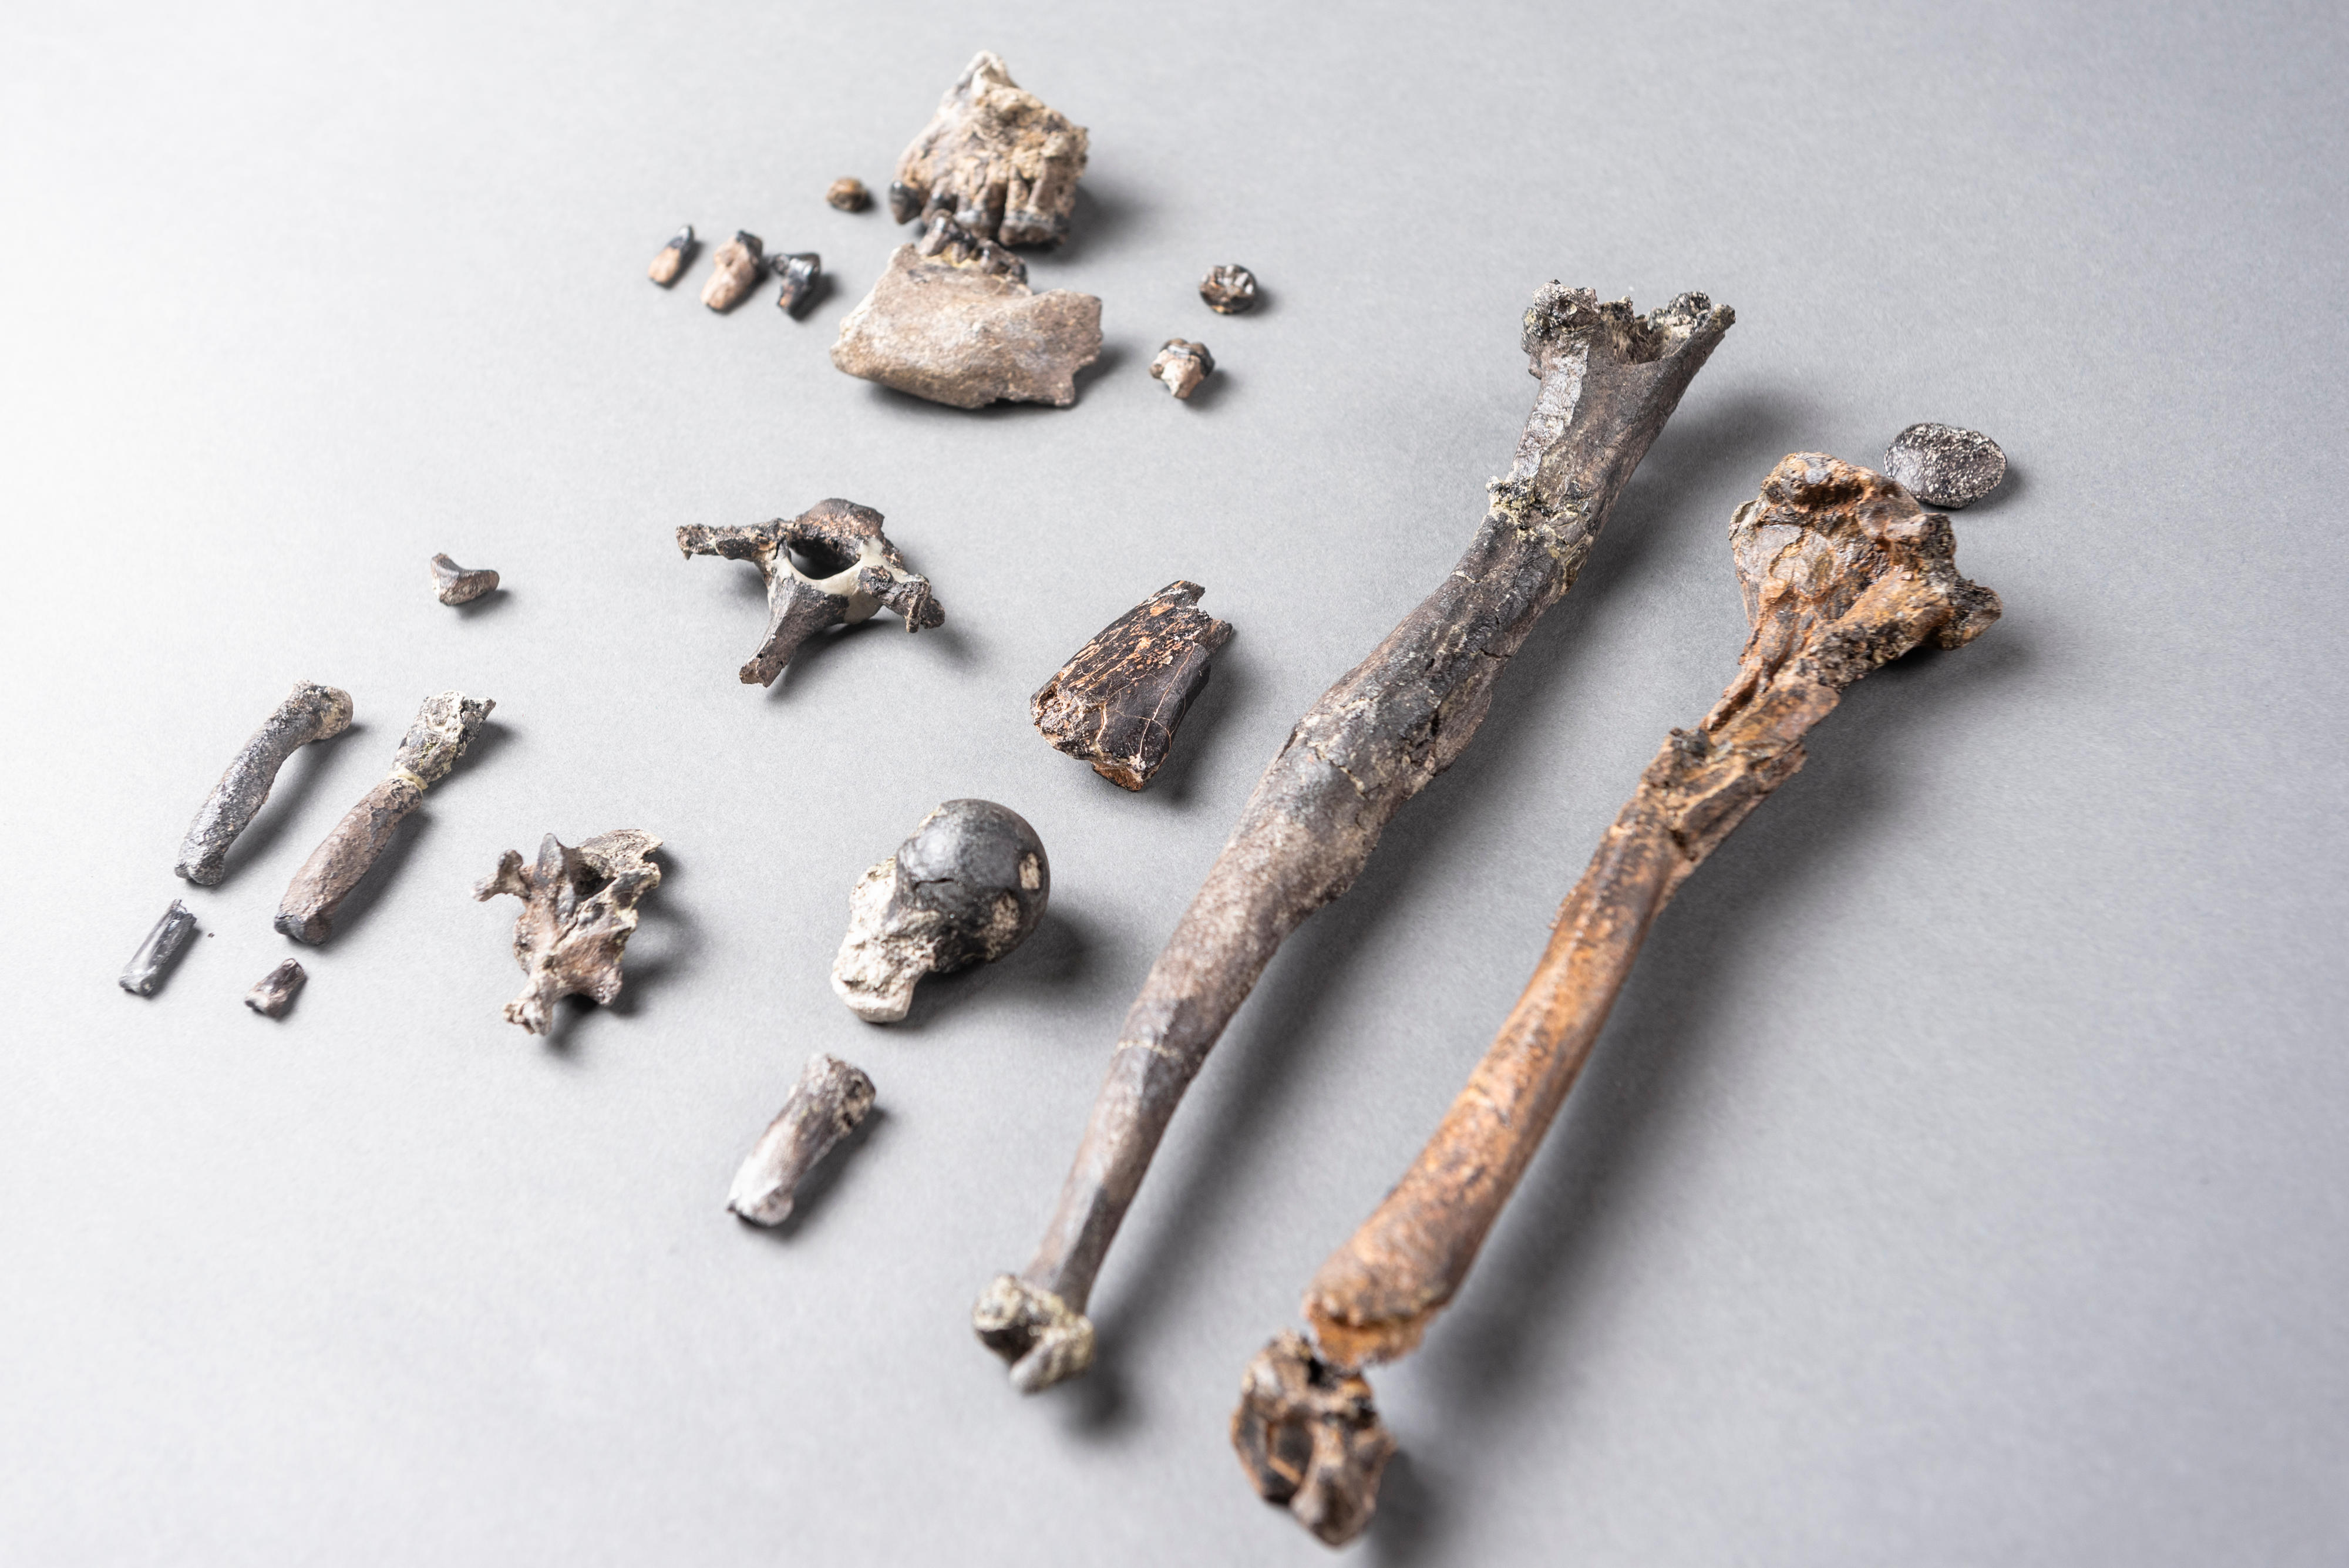 Monkey teeth are shedding new light on how early humans used tools